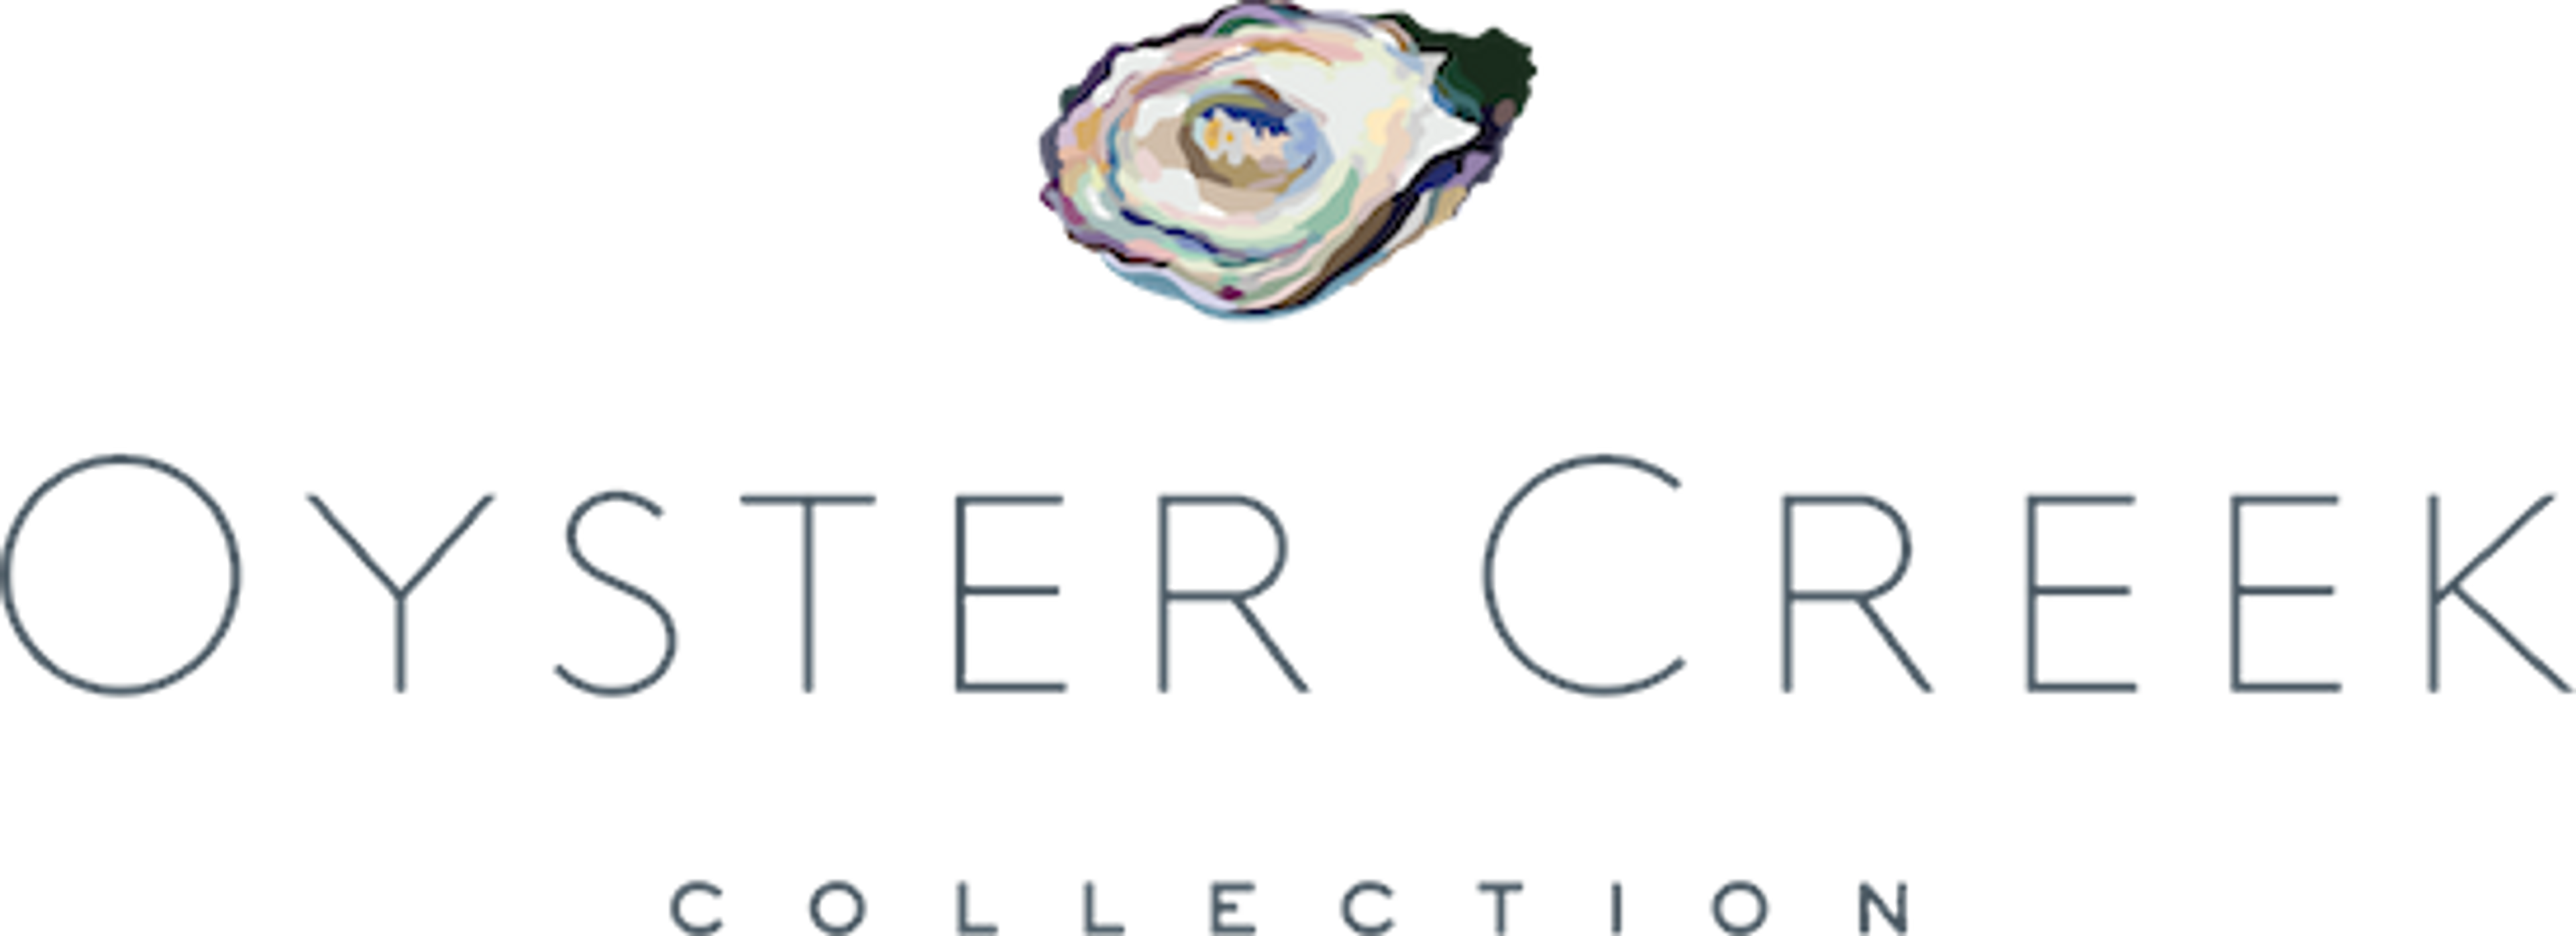 oystercreekcollection